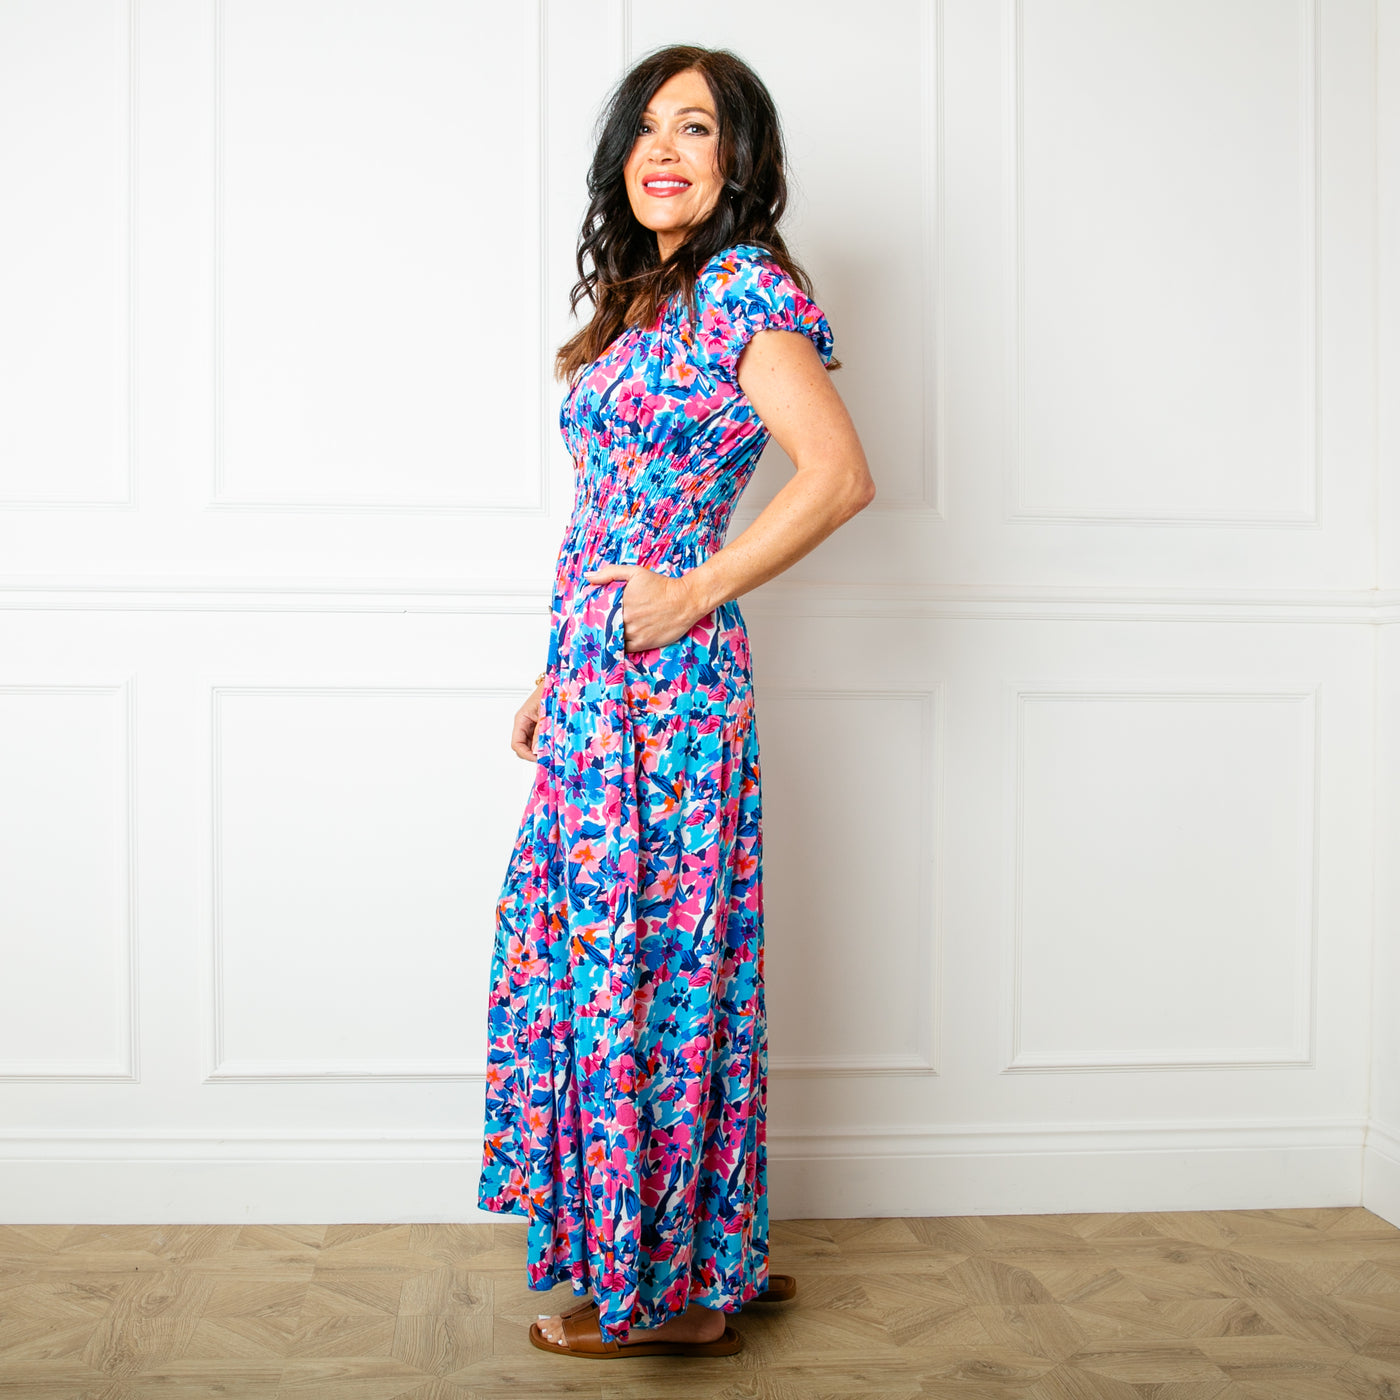 The floral blue Printed Button Maxi Dress with a shirred elasticted waistband and button detailing down the front